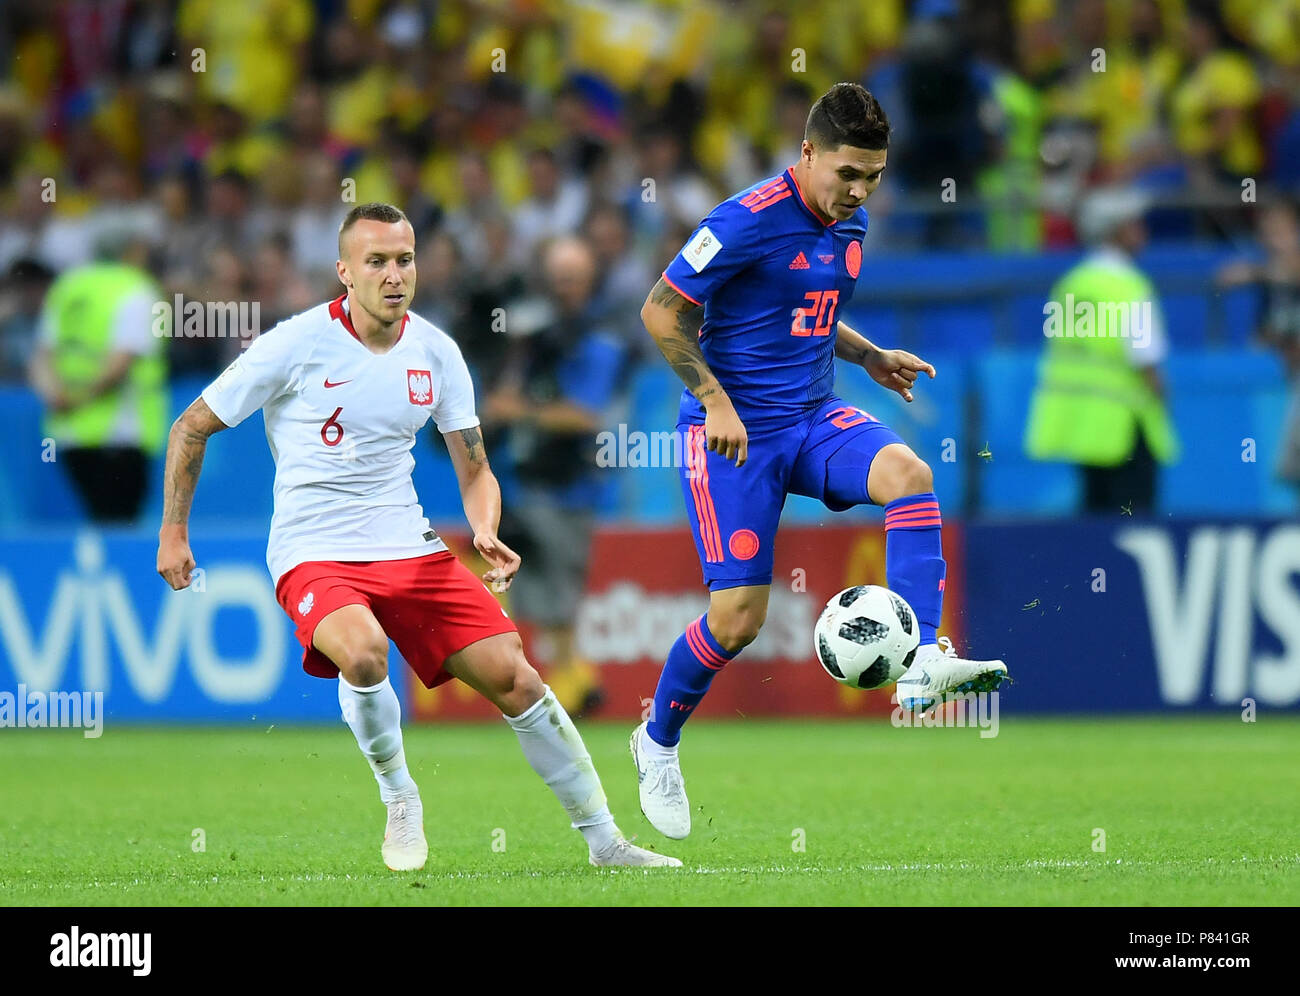 KAZAN, RUSSIA - JUNE 24: Jacek Goralski of Poland competes with Juan Quintero of Colombia during the 2018 FIFA World Cup Russia group H match between Poland and Colombia at Kazan Arena on June 24, 2018 in Kazan, Russia. (Photo by Lukasz Laskowski/PressFocus/MB Media) Stock Photo